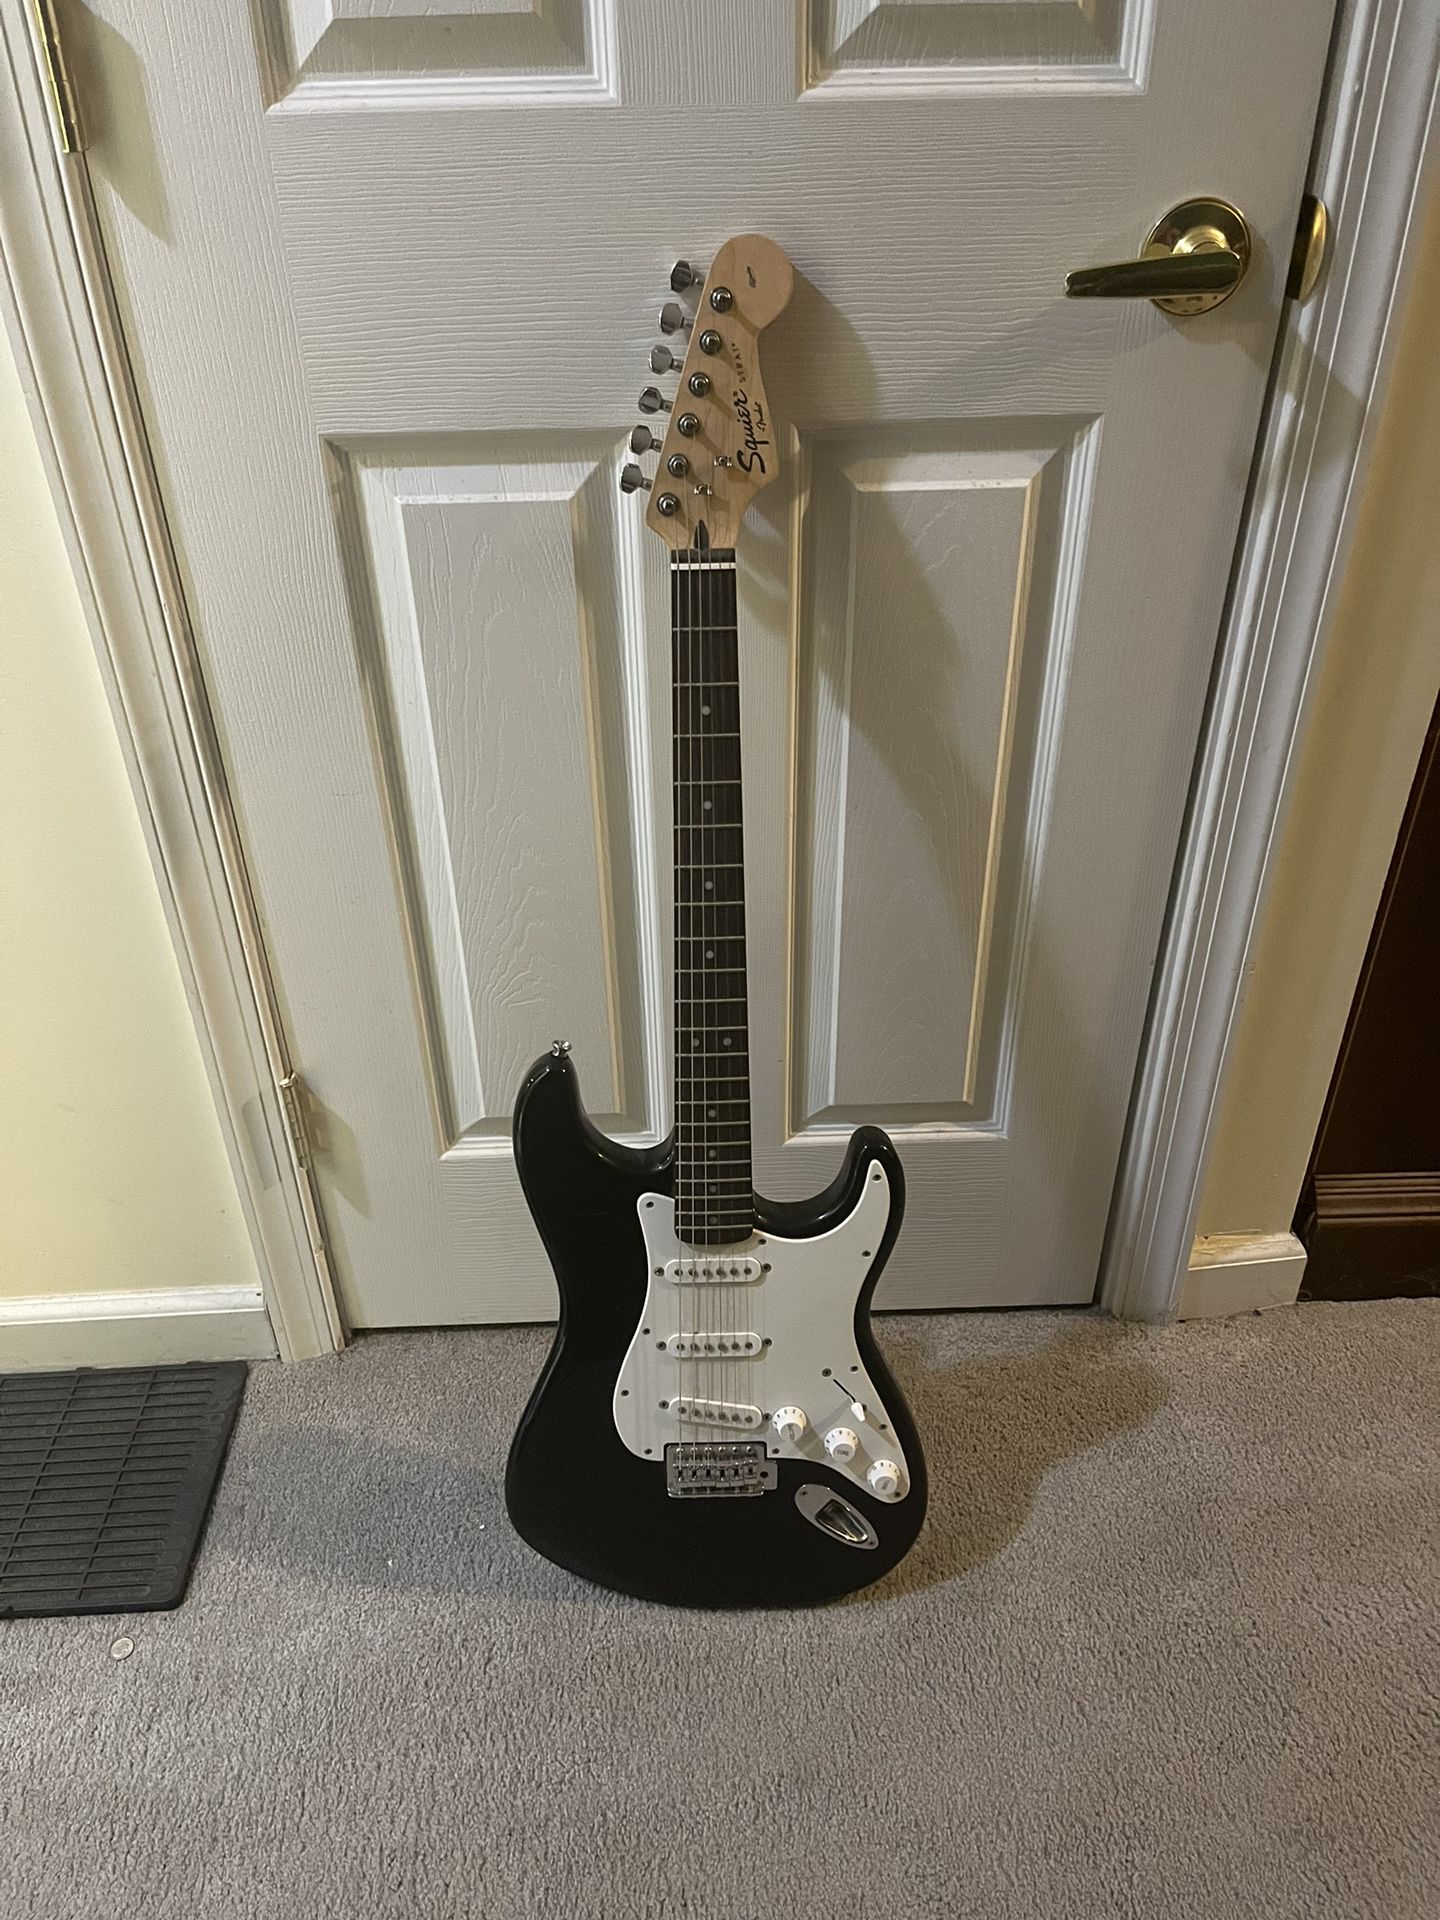 Black and white electric guitar